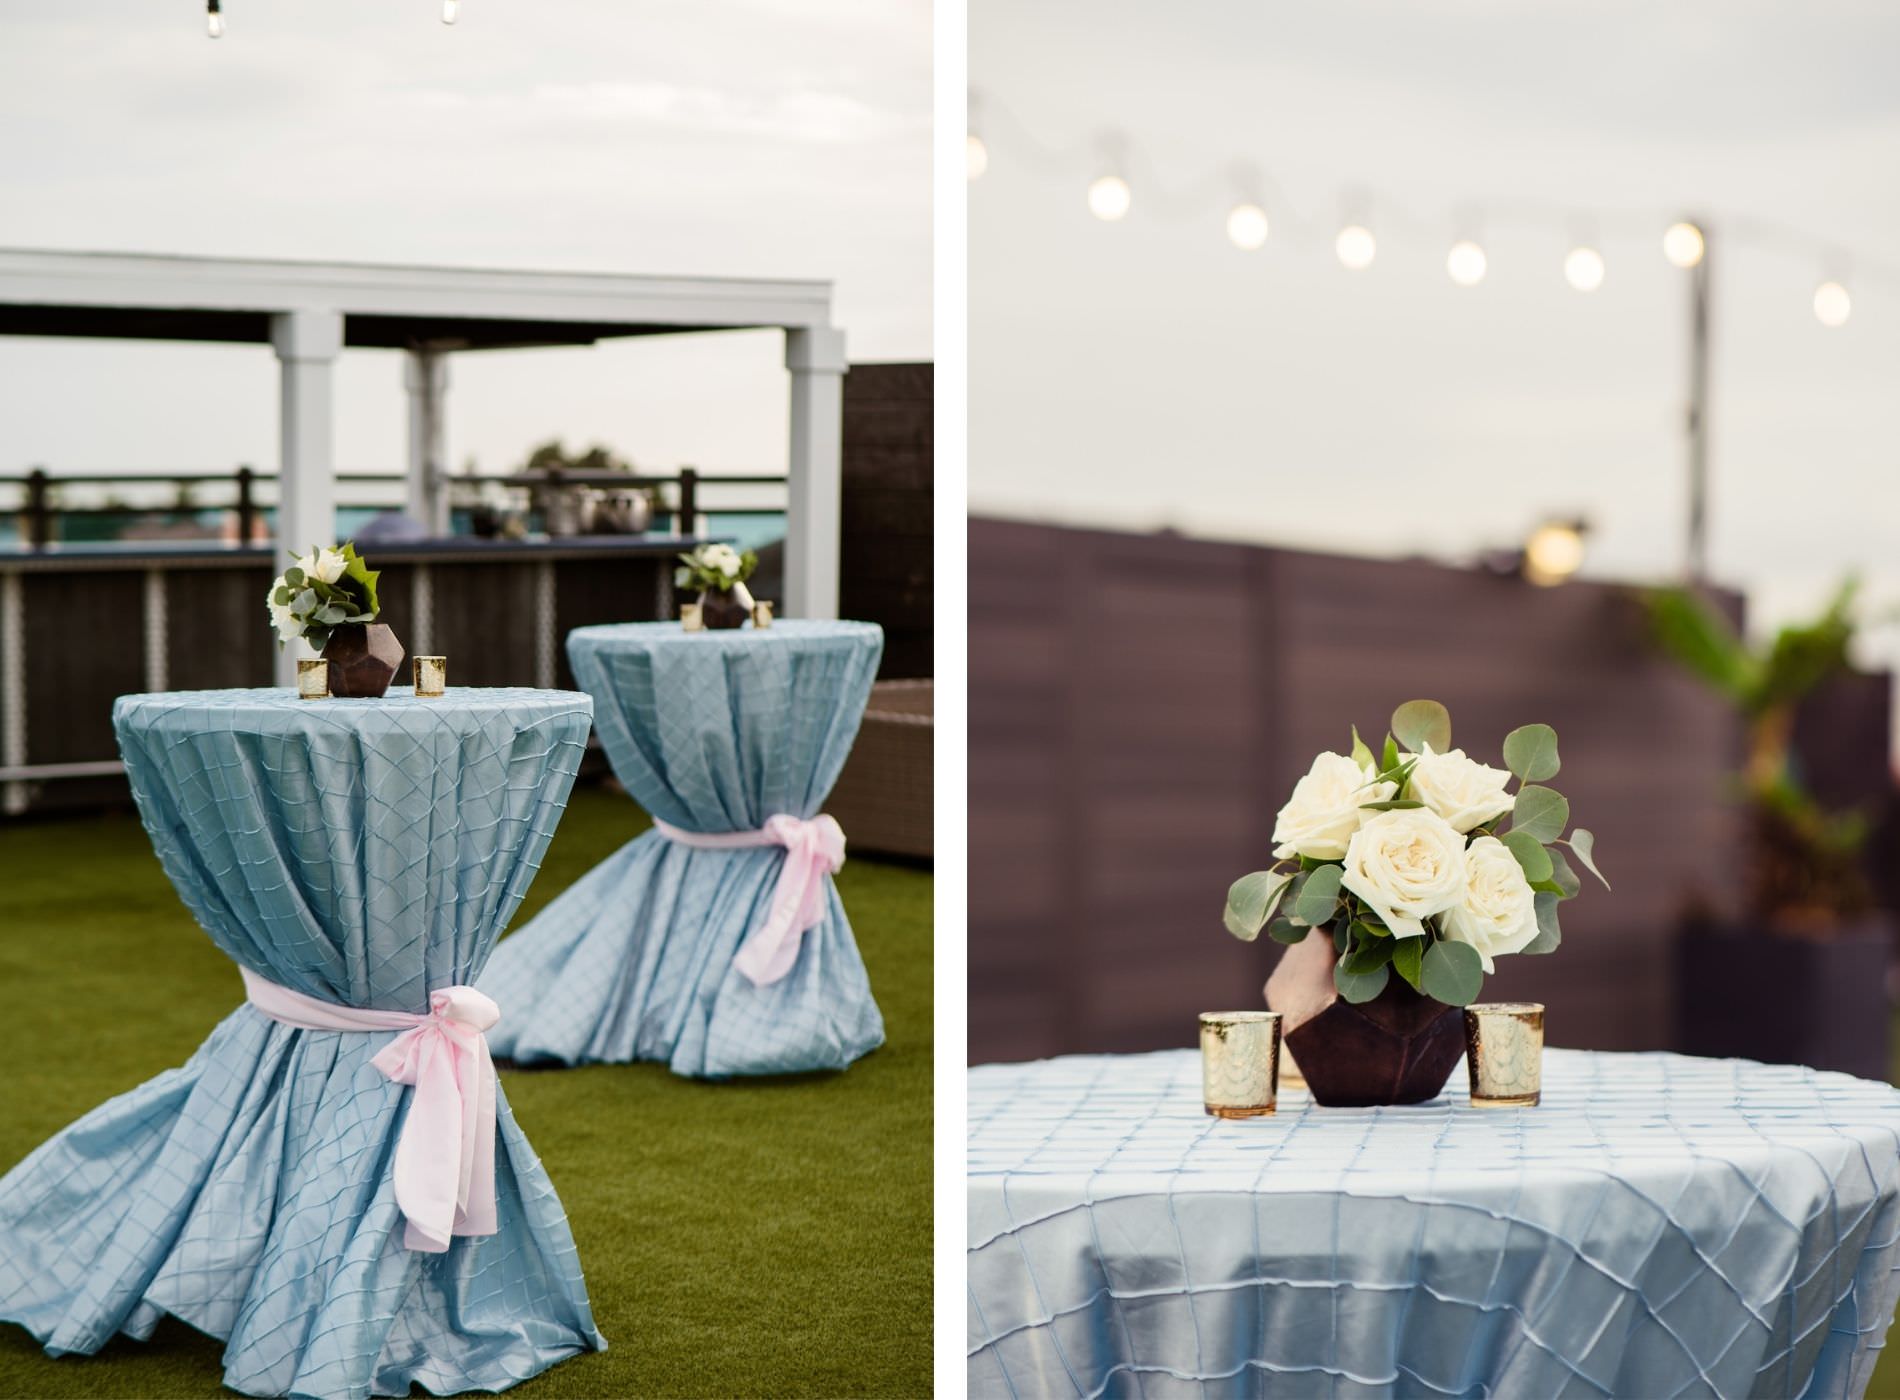 Boho Tropical Rooftop Wedding Reception Decor, Cocktail Tables with Baby Blue Linens, Small Floral Centerpieces, White Roses with Eucalyptus, Gold Mercury Candle Votives | Tampa Bay Wedding Planner Perfecting the Plan | Wedding Florist Iza's Flowers | St. Pete Waterfront Wedding Venue The Hotel Zamora